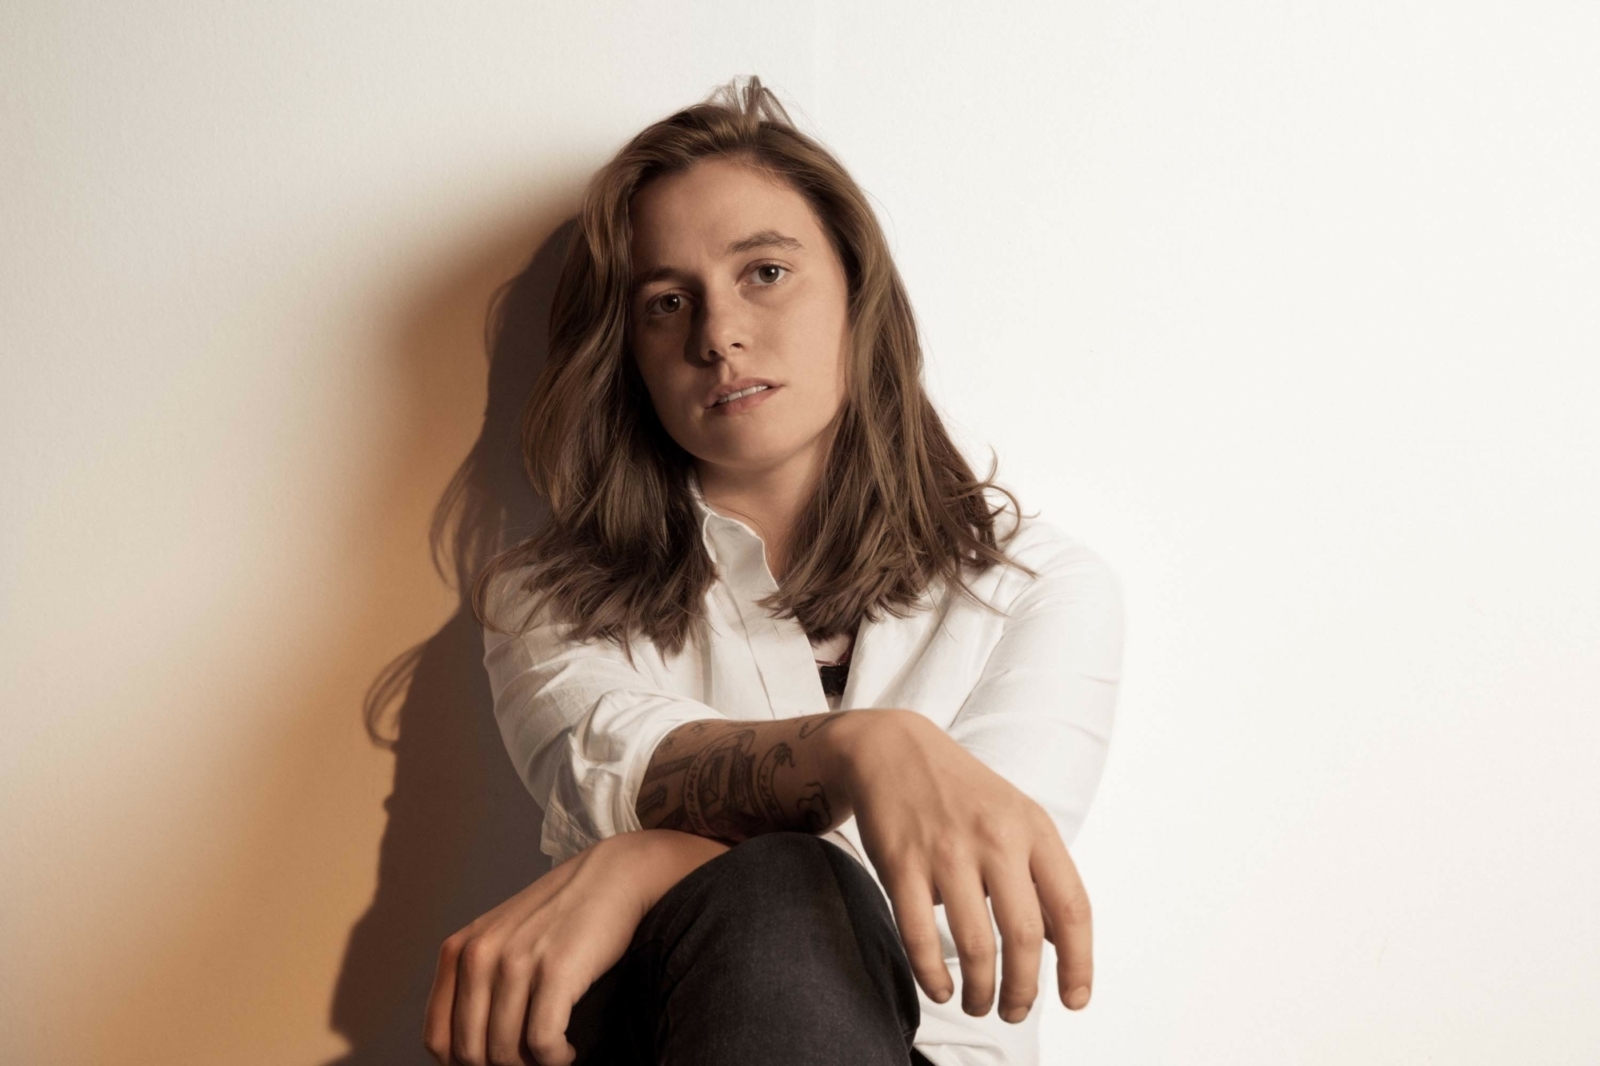 Julien Baker: “I spent a lot of time re-evaluating who I was as a person”